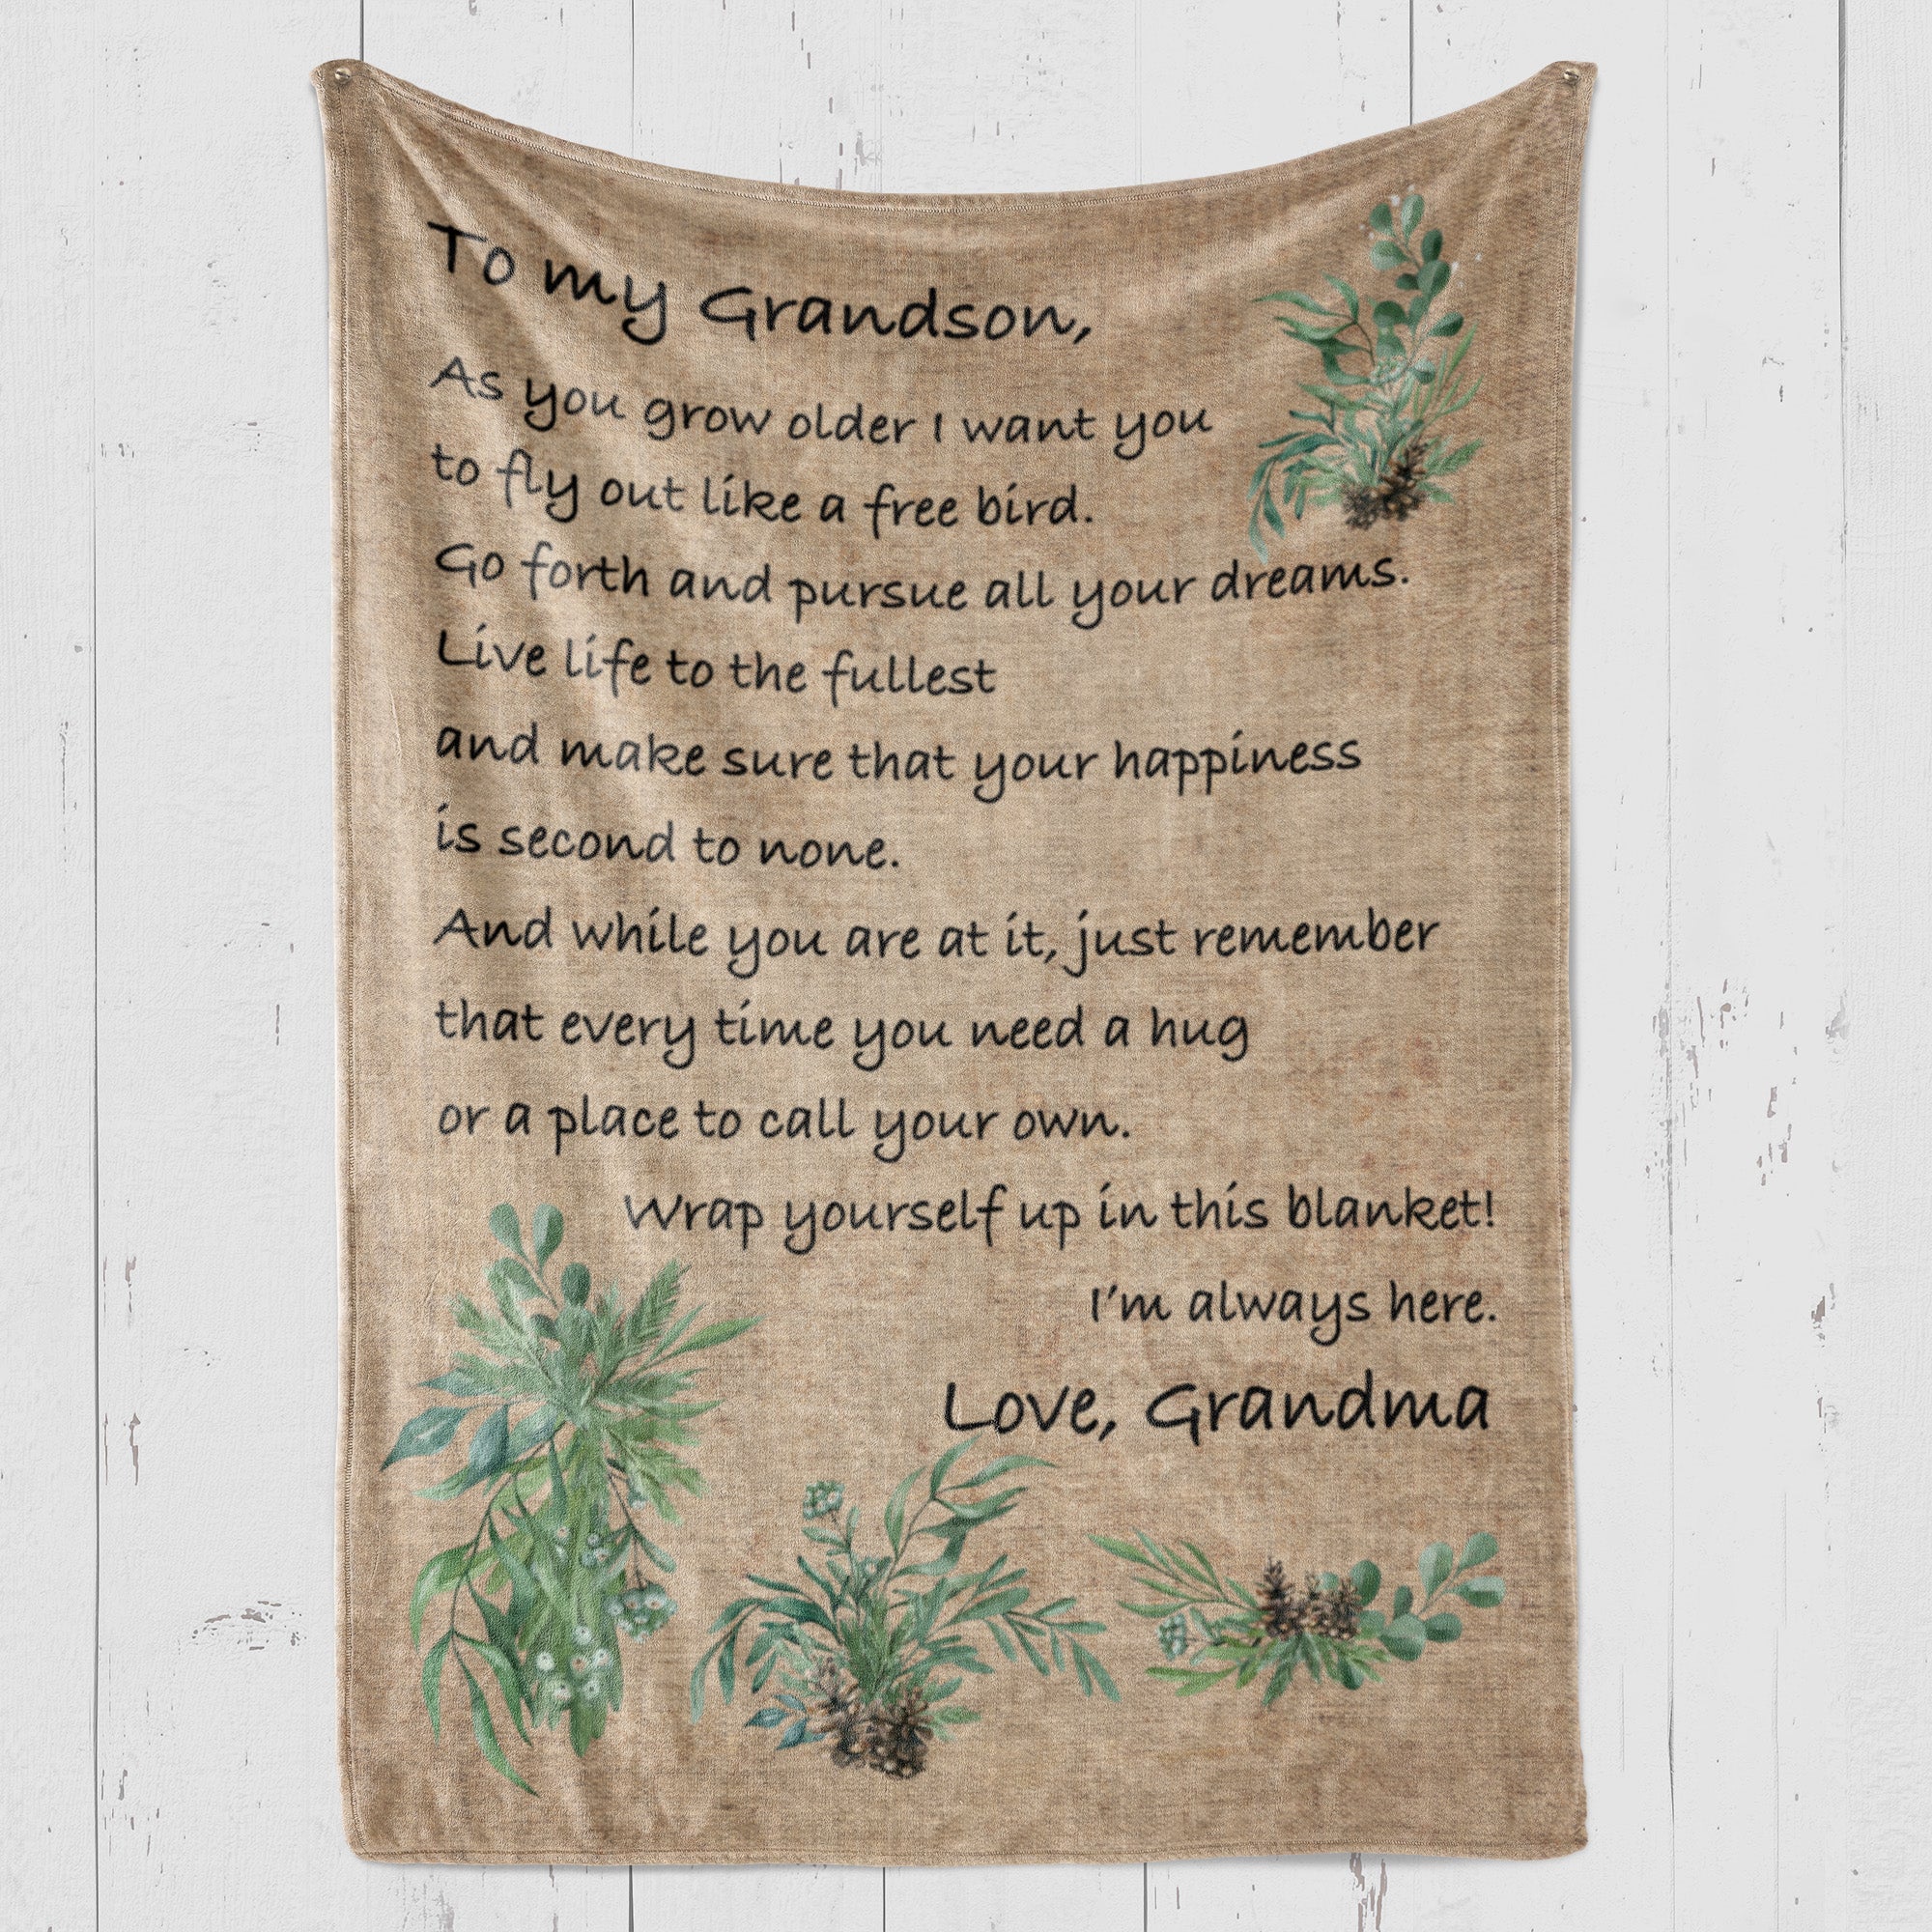 Blanket Christmas Gift For Grandson, Graduation Gifts For Grandson, I Want You To Fly